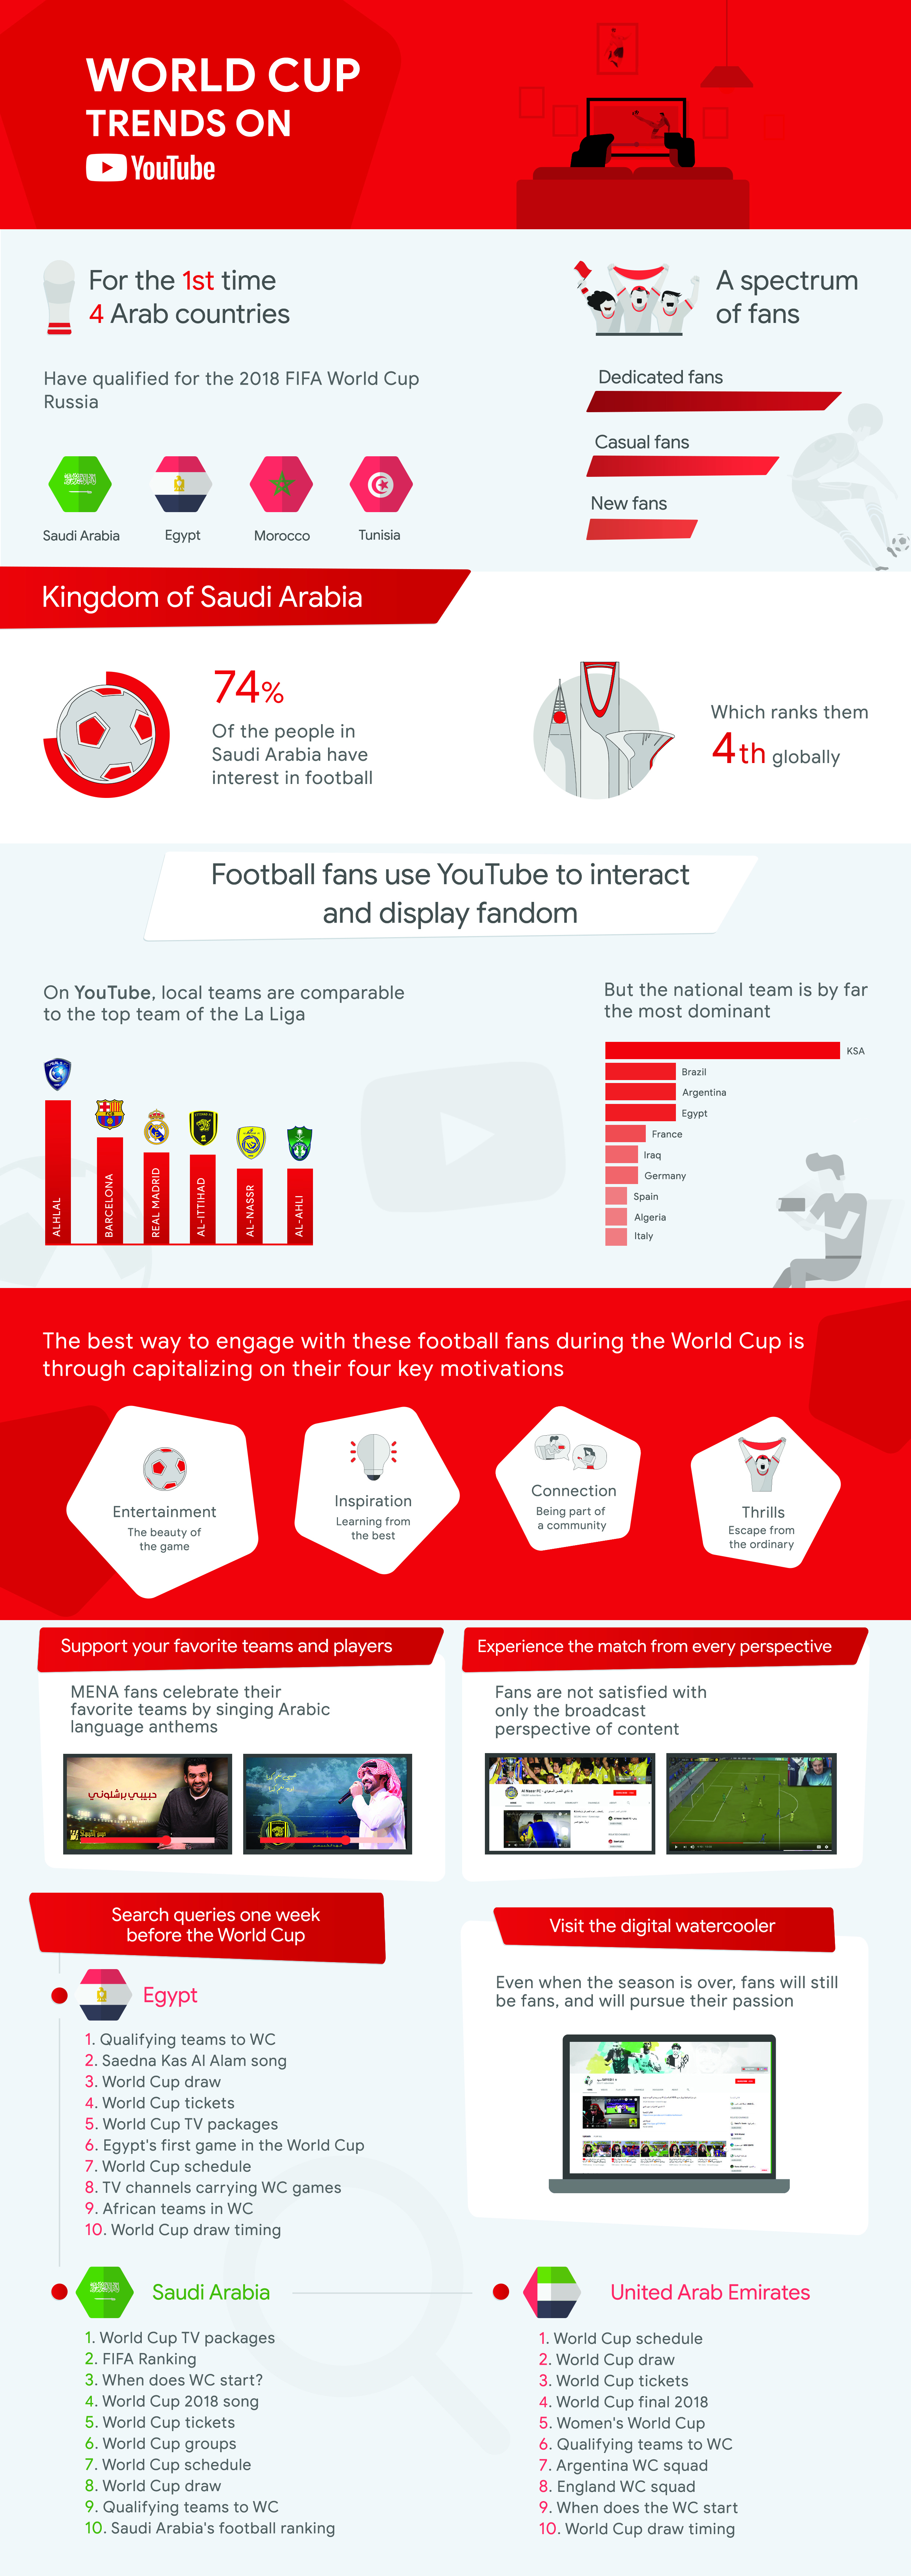 World Cup Trends on YouTube